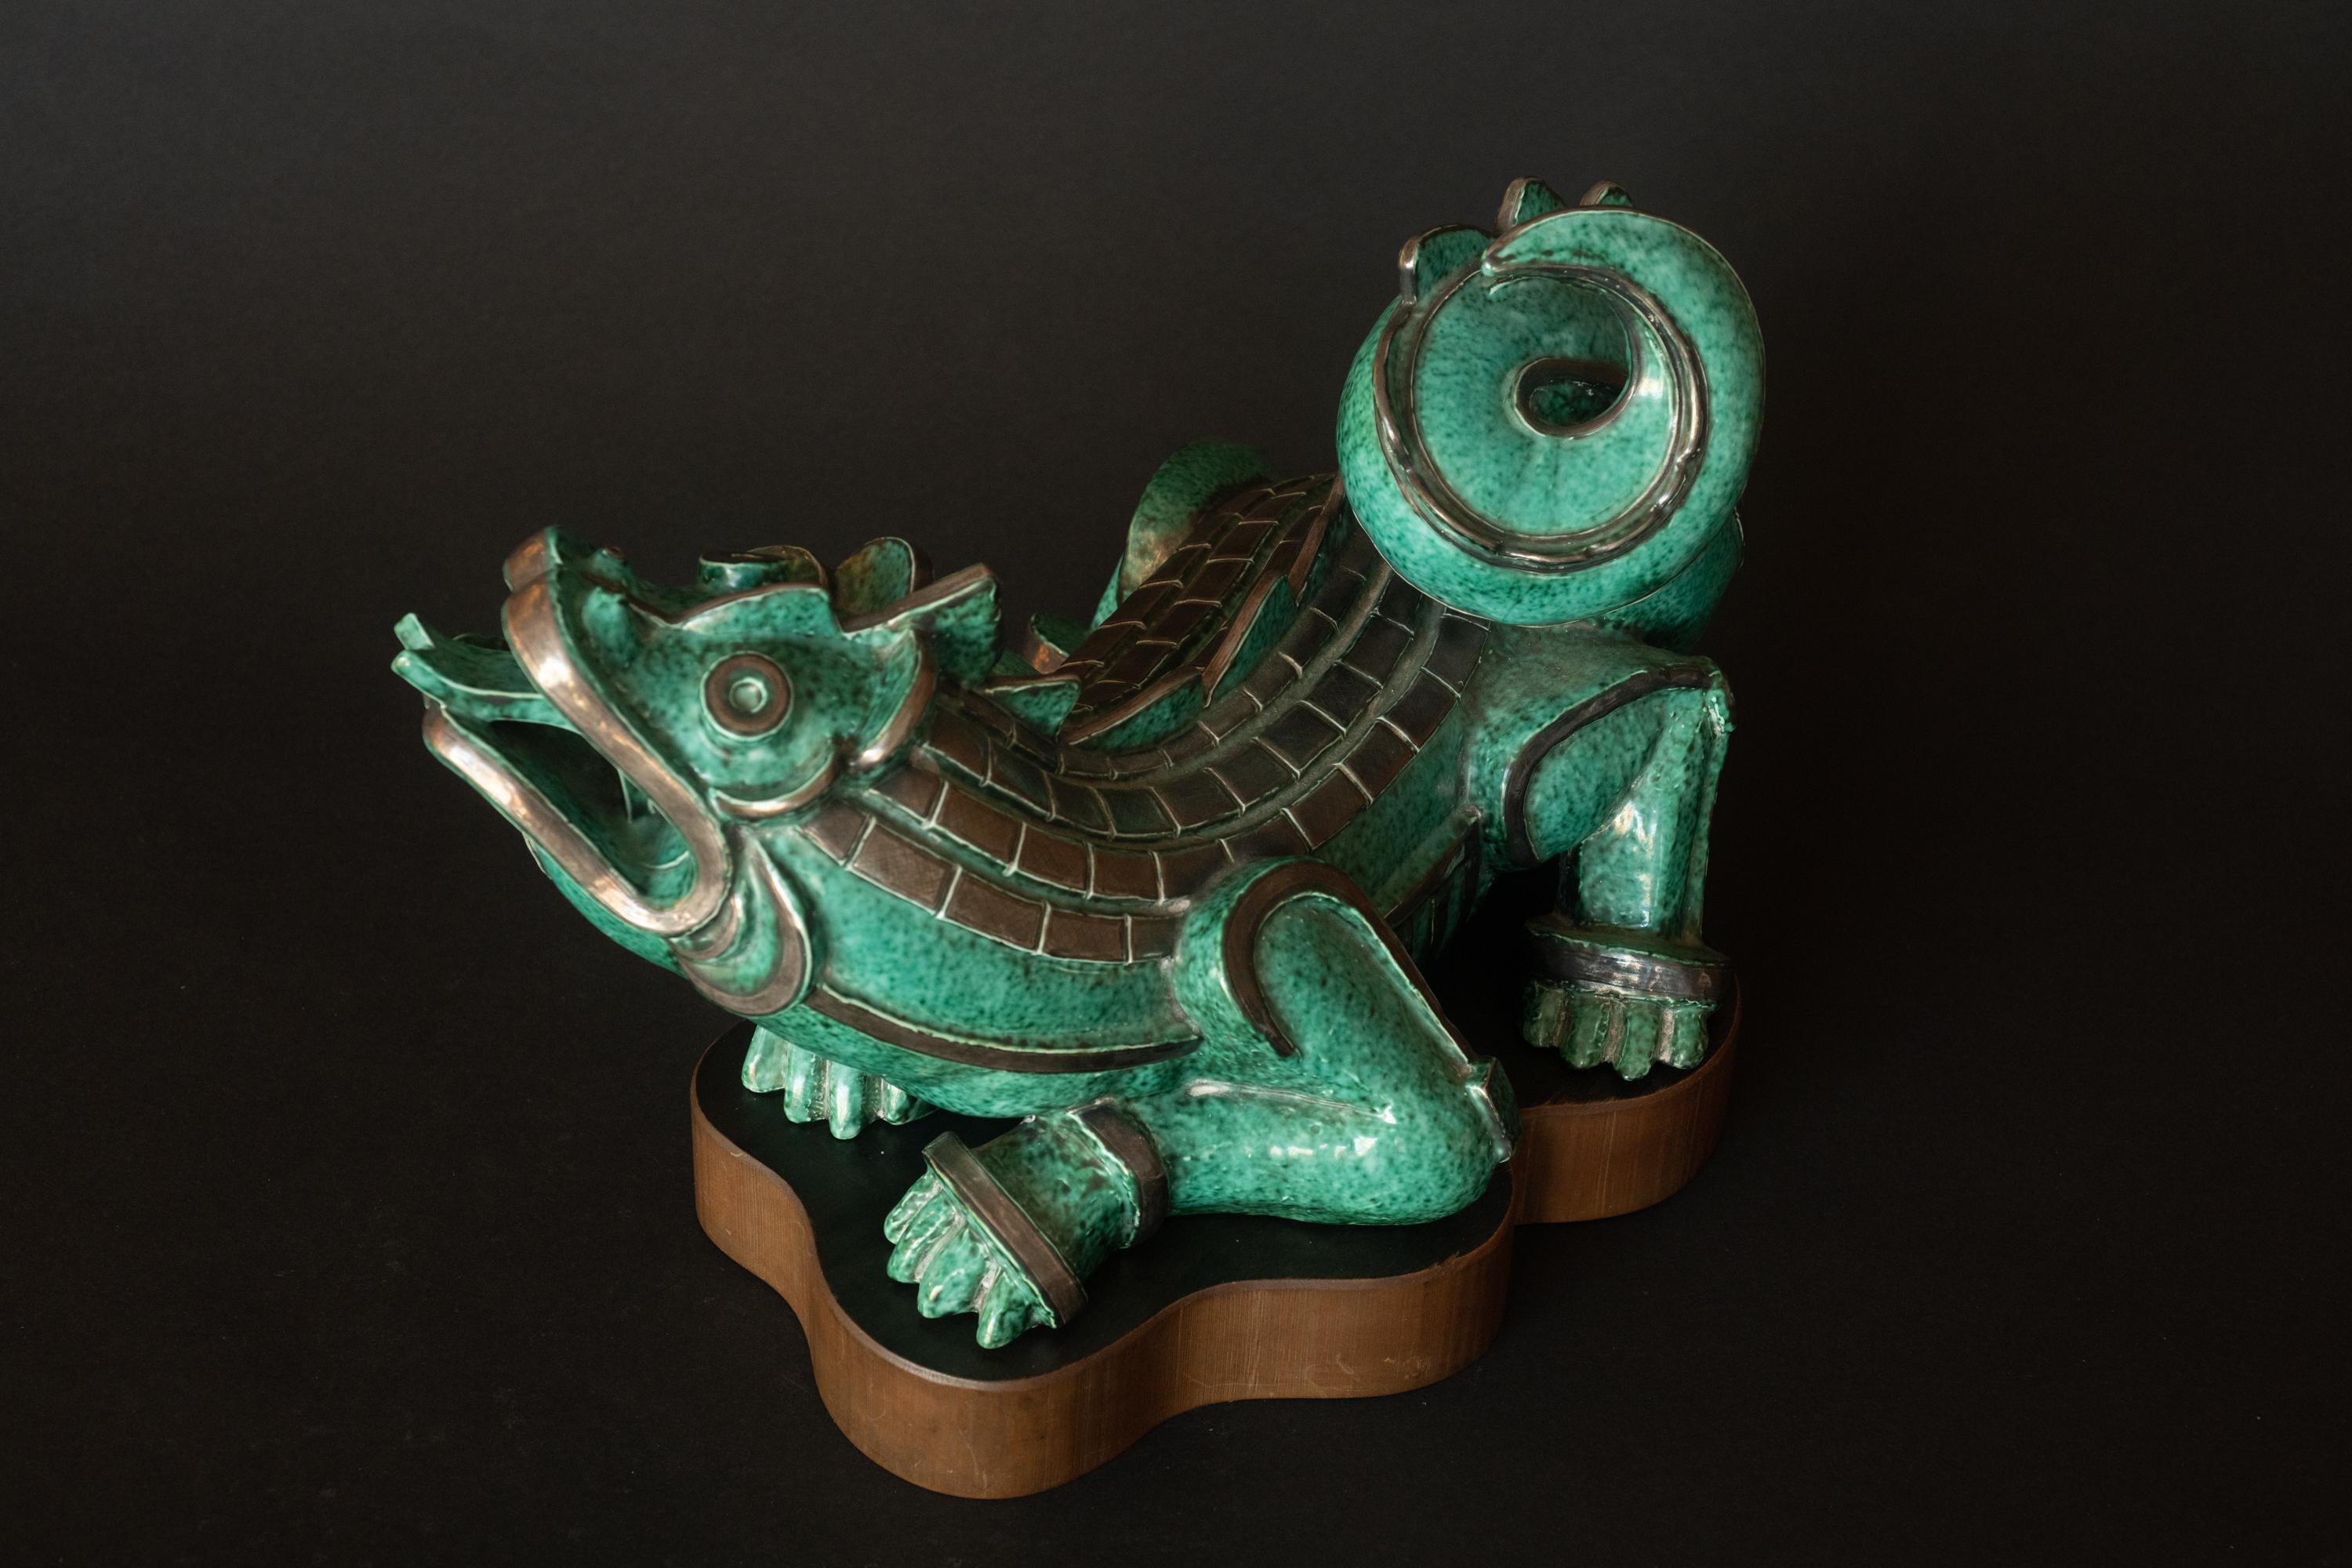 ARGENTA DRAGON, by Wilhelm Kåge (Swedish, 1889-1960), aqua green-glazed stoneware with sterling silver accents, mounted on a custom molded wood base, c. 1930, most likely an exhibition piece. 

The striking mottled aqua green glaze is an early